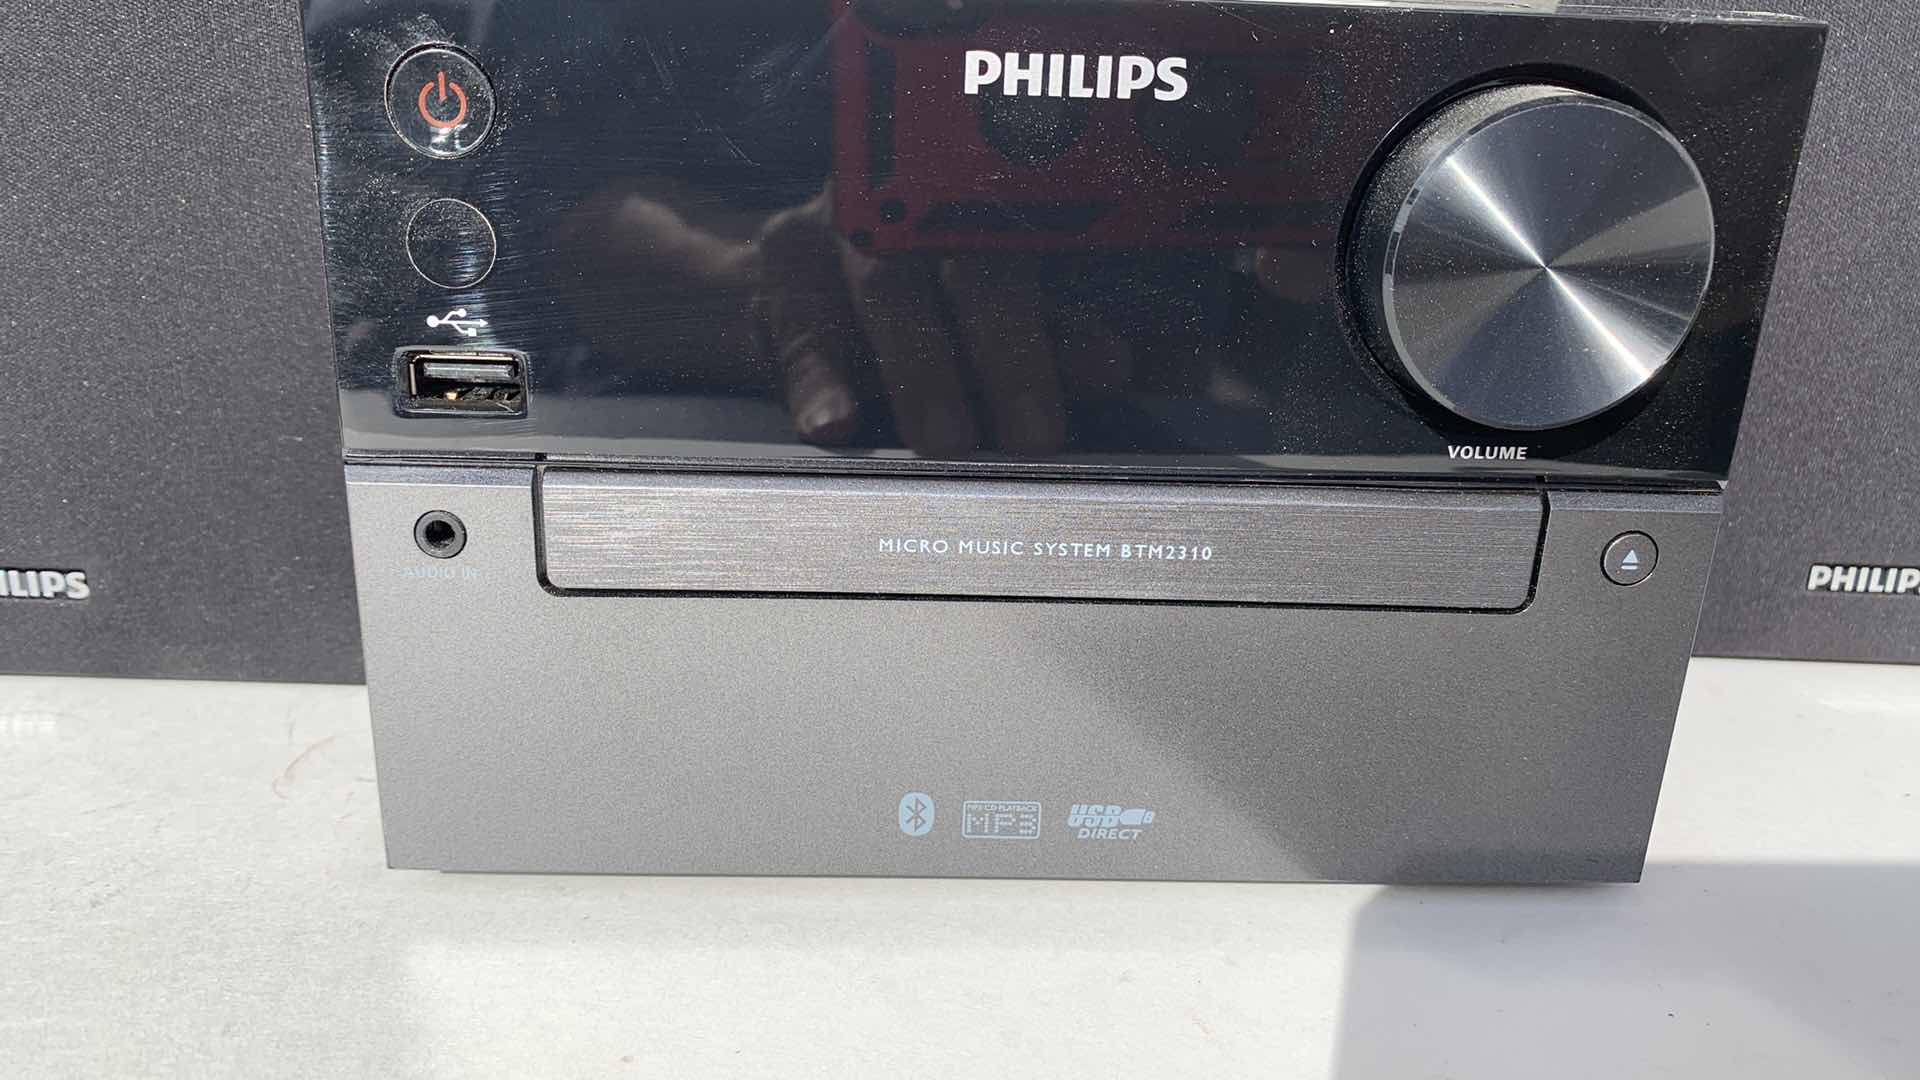 Photo 2 of PHILIPS MICRO MUSIC SYSTEM BTM2310